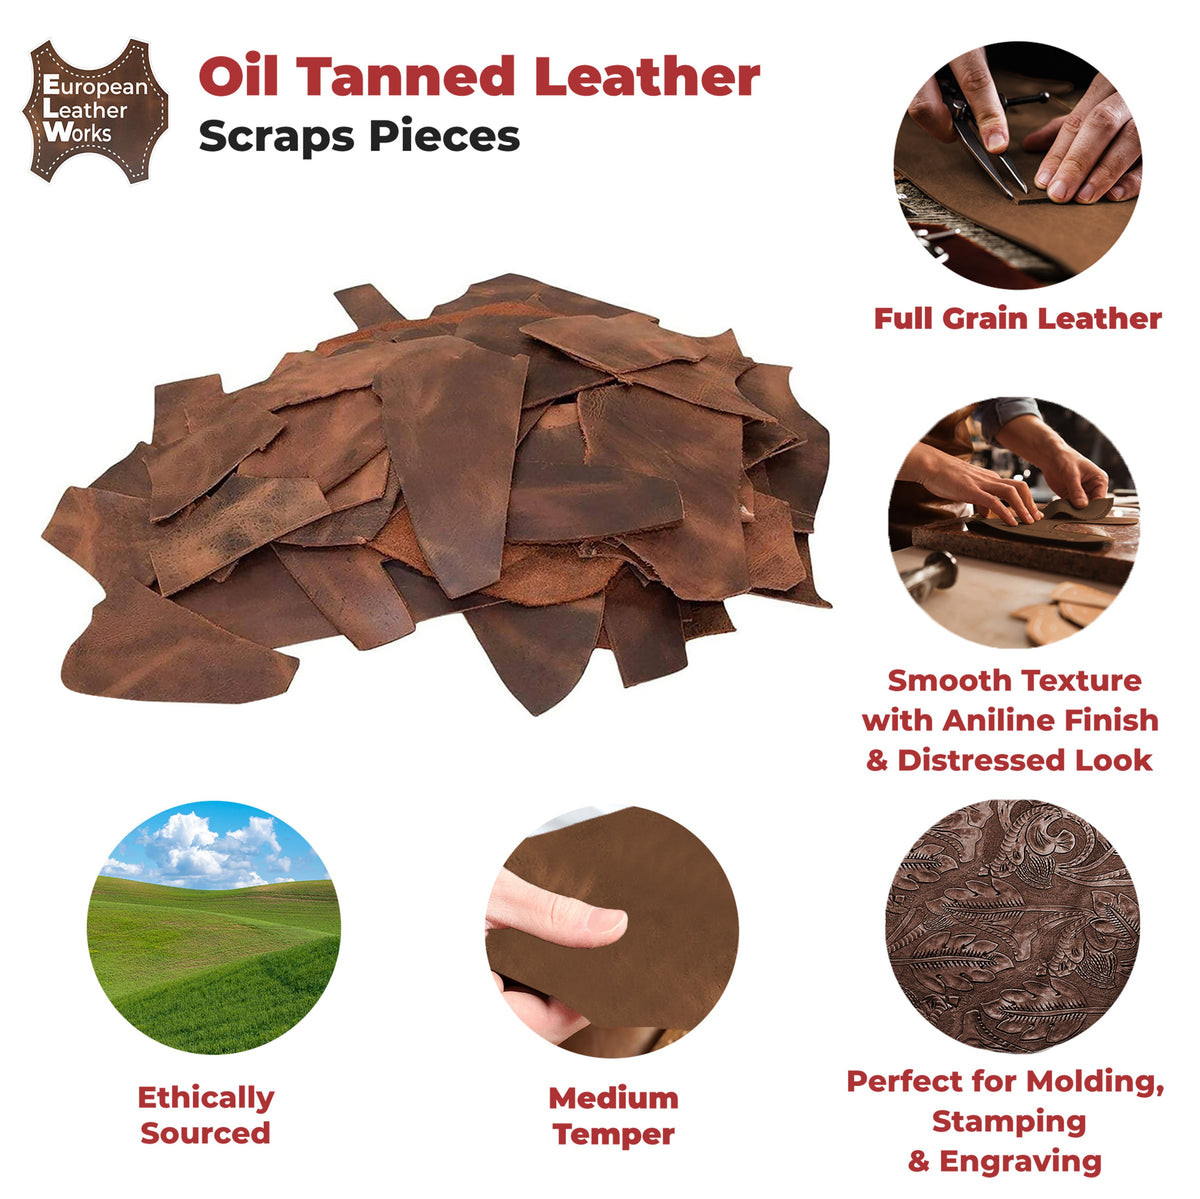 ELW Genuine Natural Full Grain Leather 5 lbs Sizes Scraps, Trimming 5/6 OZ  (2-2.4mm) Perfect for Leather Crafts, DIY, Accessories, Sheaths, Holsters,  Repair : Tobacco Brown